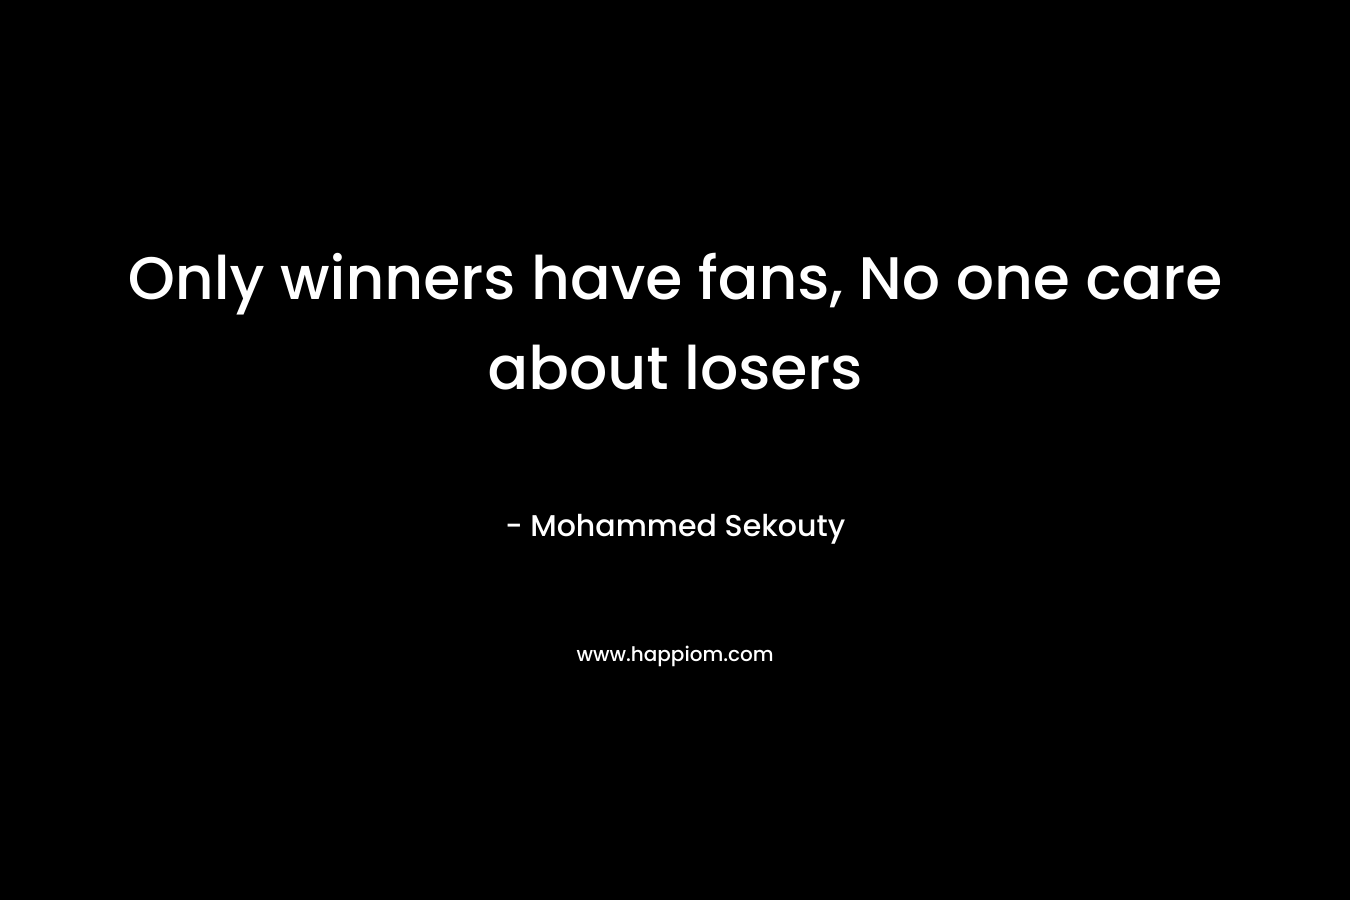 Only winners have fans, No one care about losers